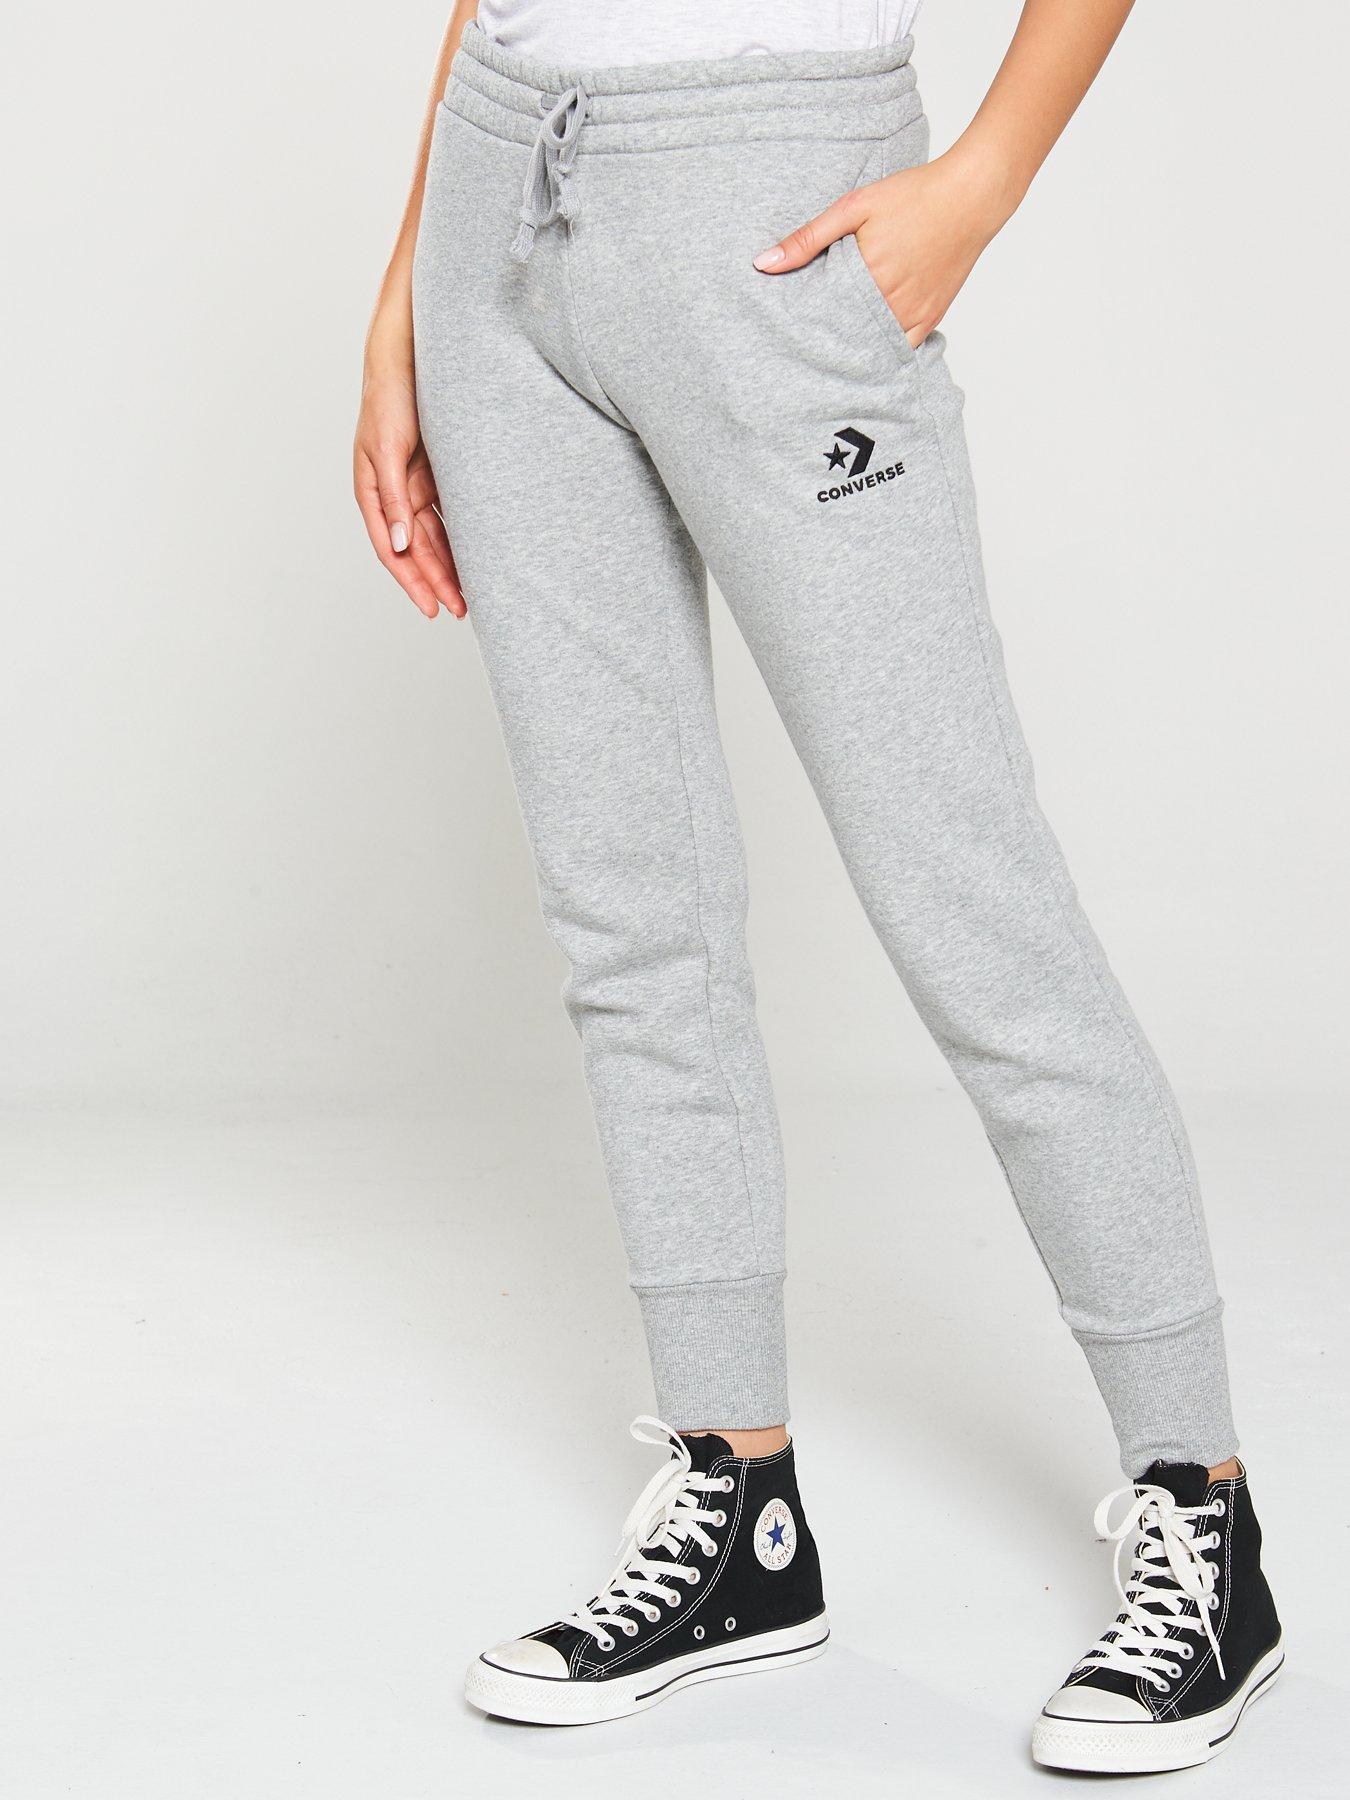 converse tracksuit bottoms womens, OFF 